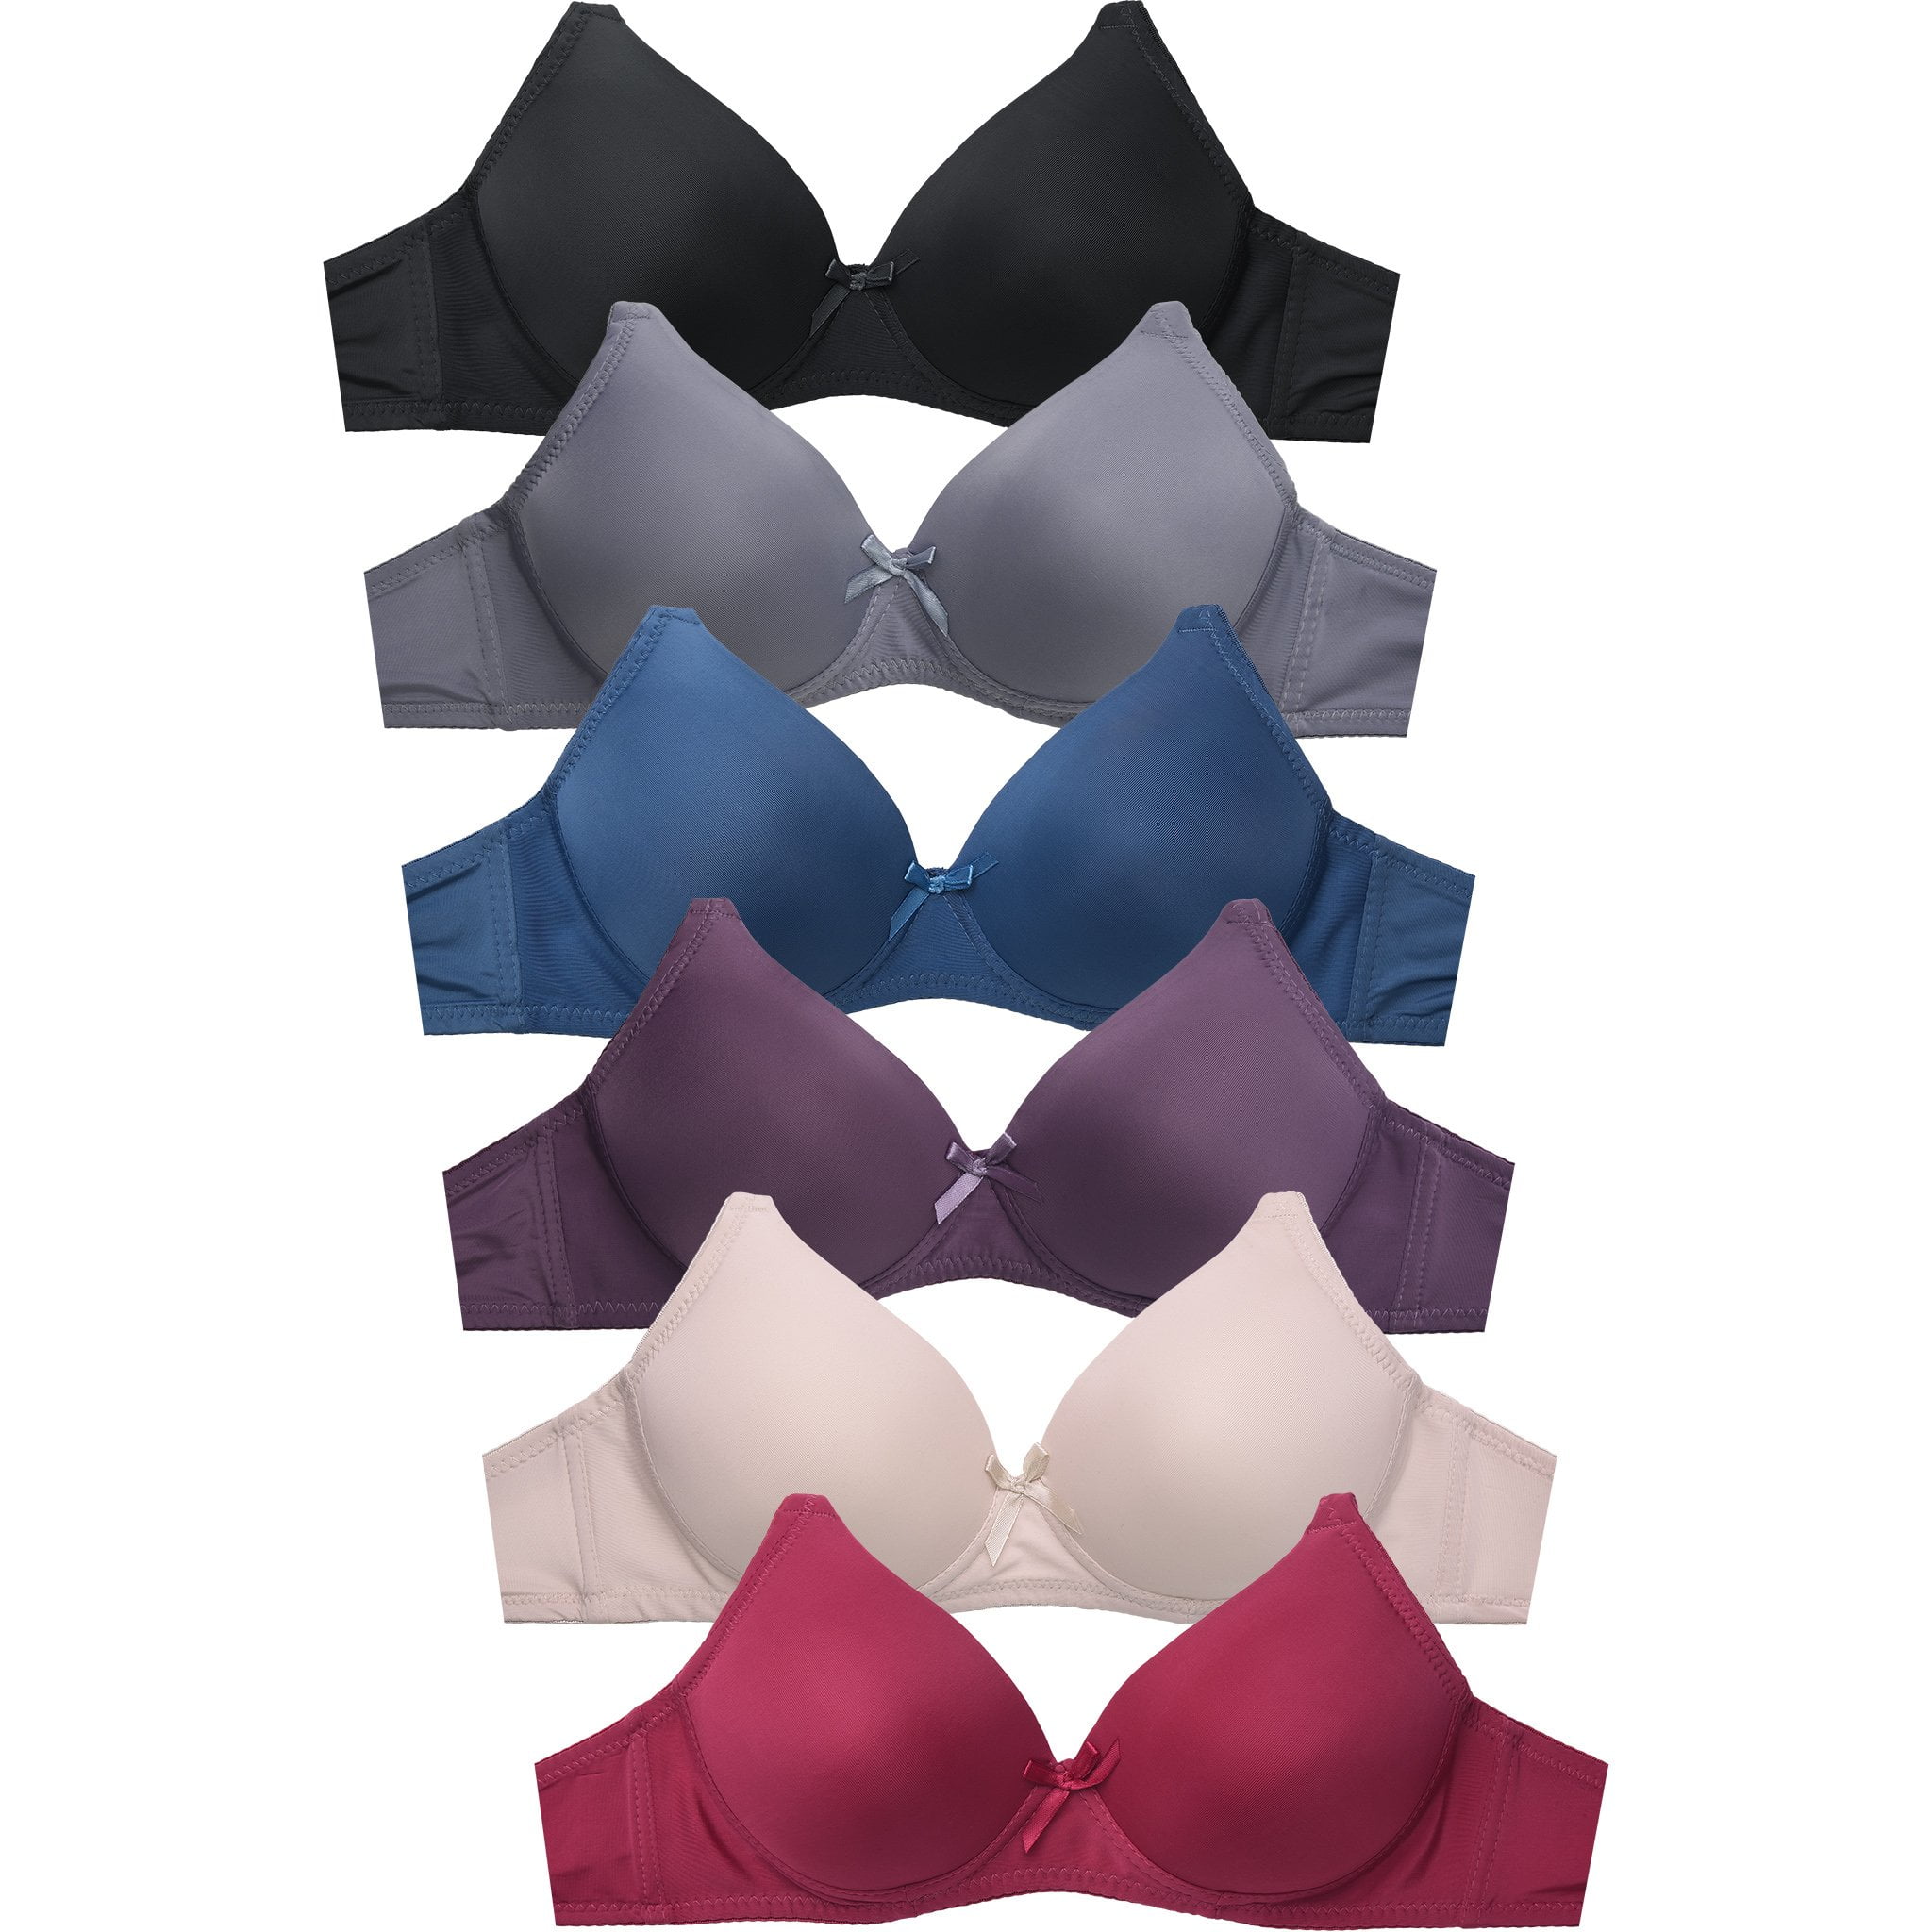 Women's Basic Plain Lace Bras Petite to Plus Size Pack of 6- Various Styles  4400PN2 NO Wire, 38C 